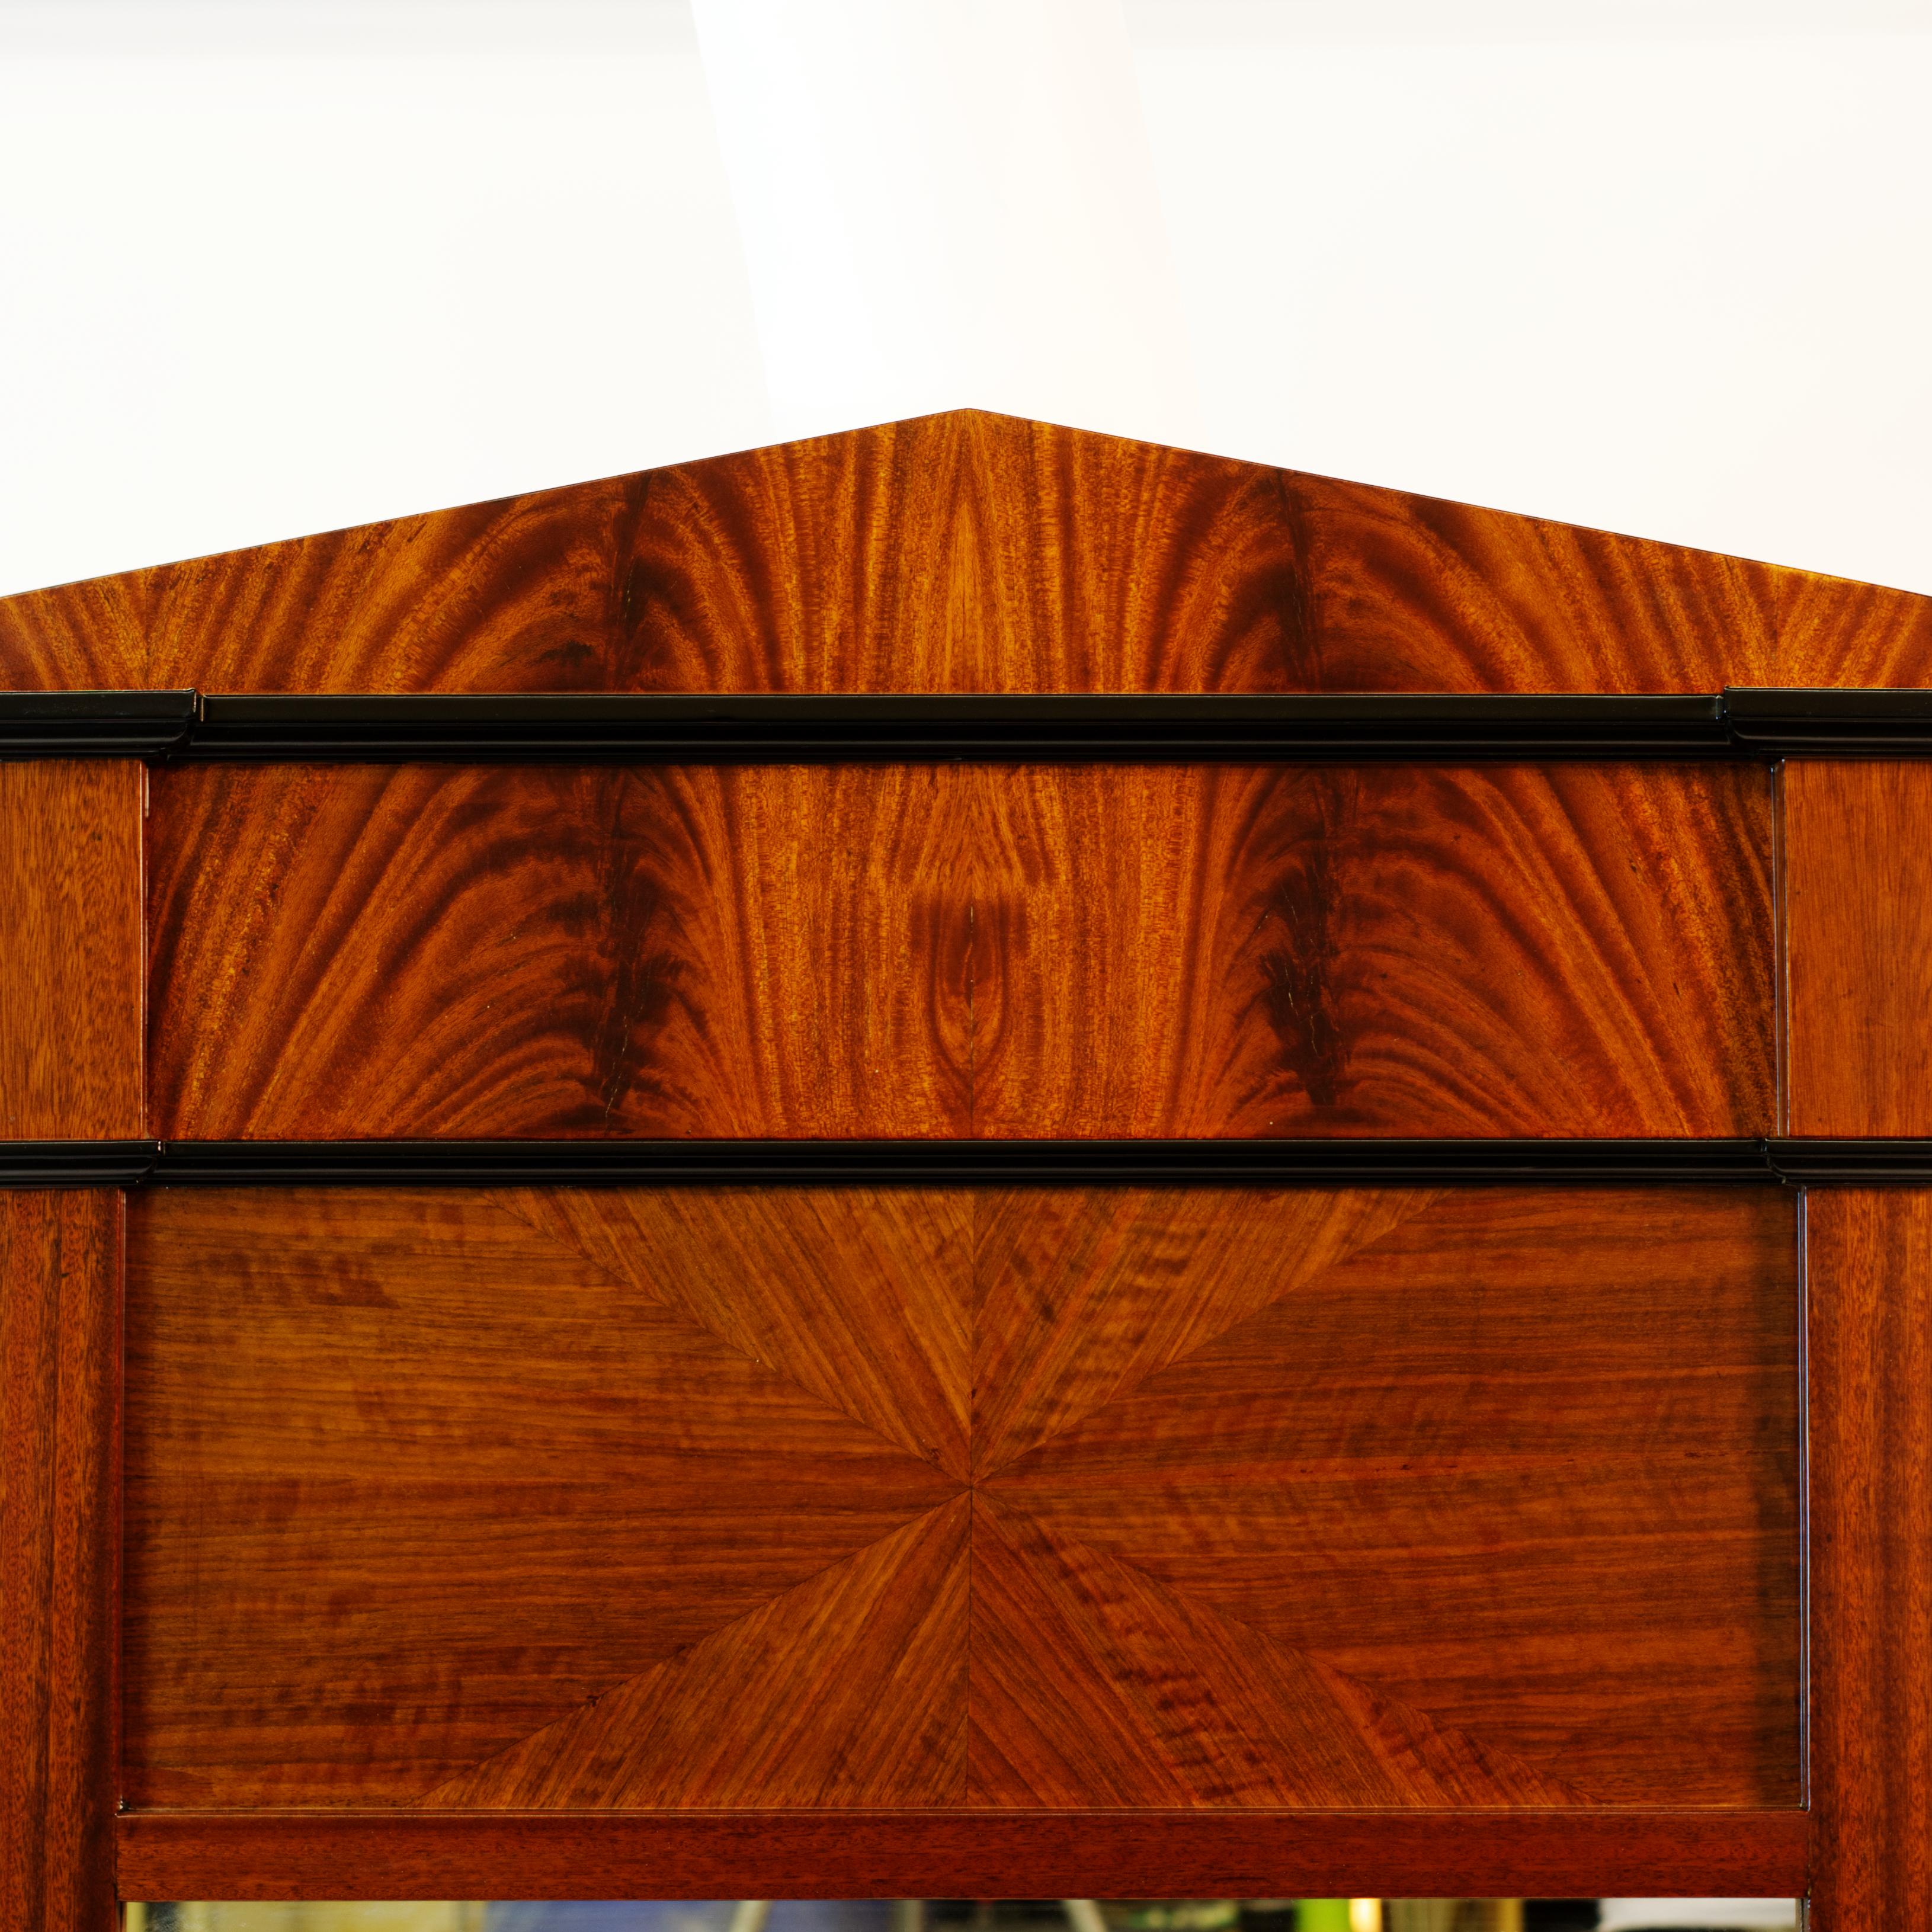 This mirror was inspired by various Biedermeier examples, featuring strong contrasting veneer work and exotic solids. Mahogany frame is accentuated by crotch mahogany veneer. Insert panels are sunburst figured walnut veneer. The mirror is finished